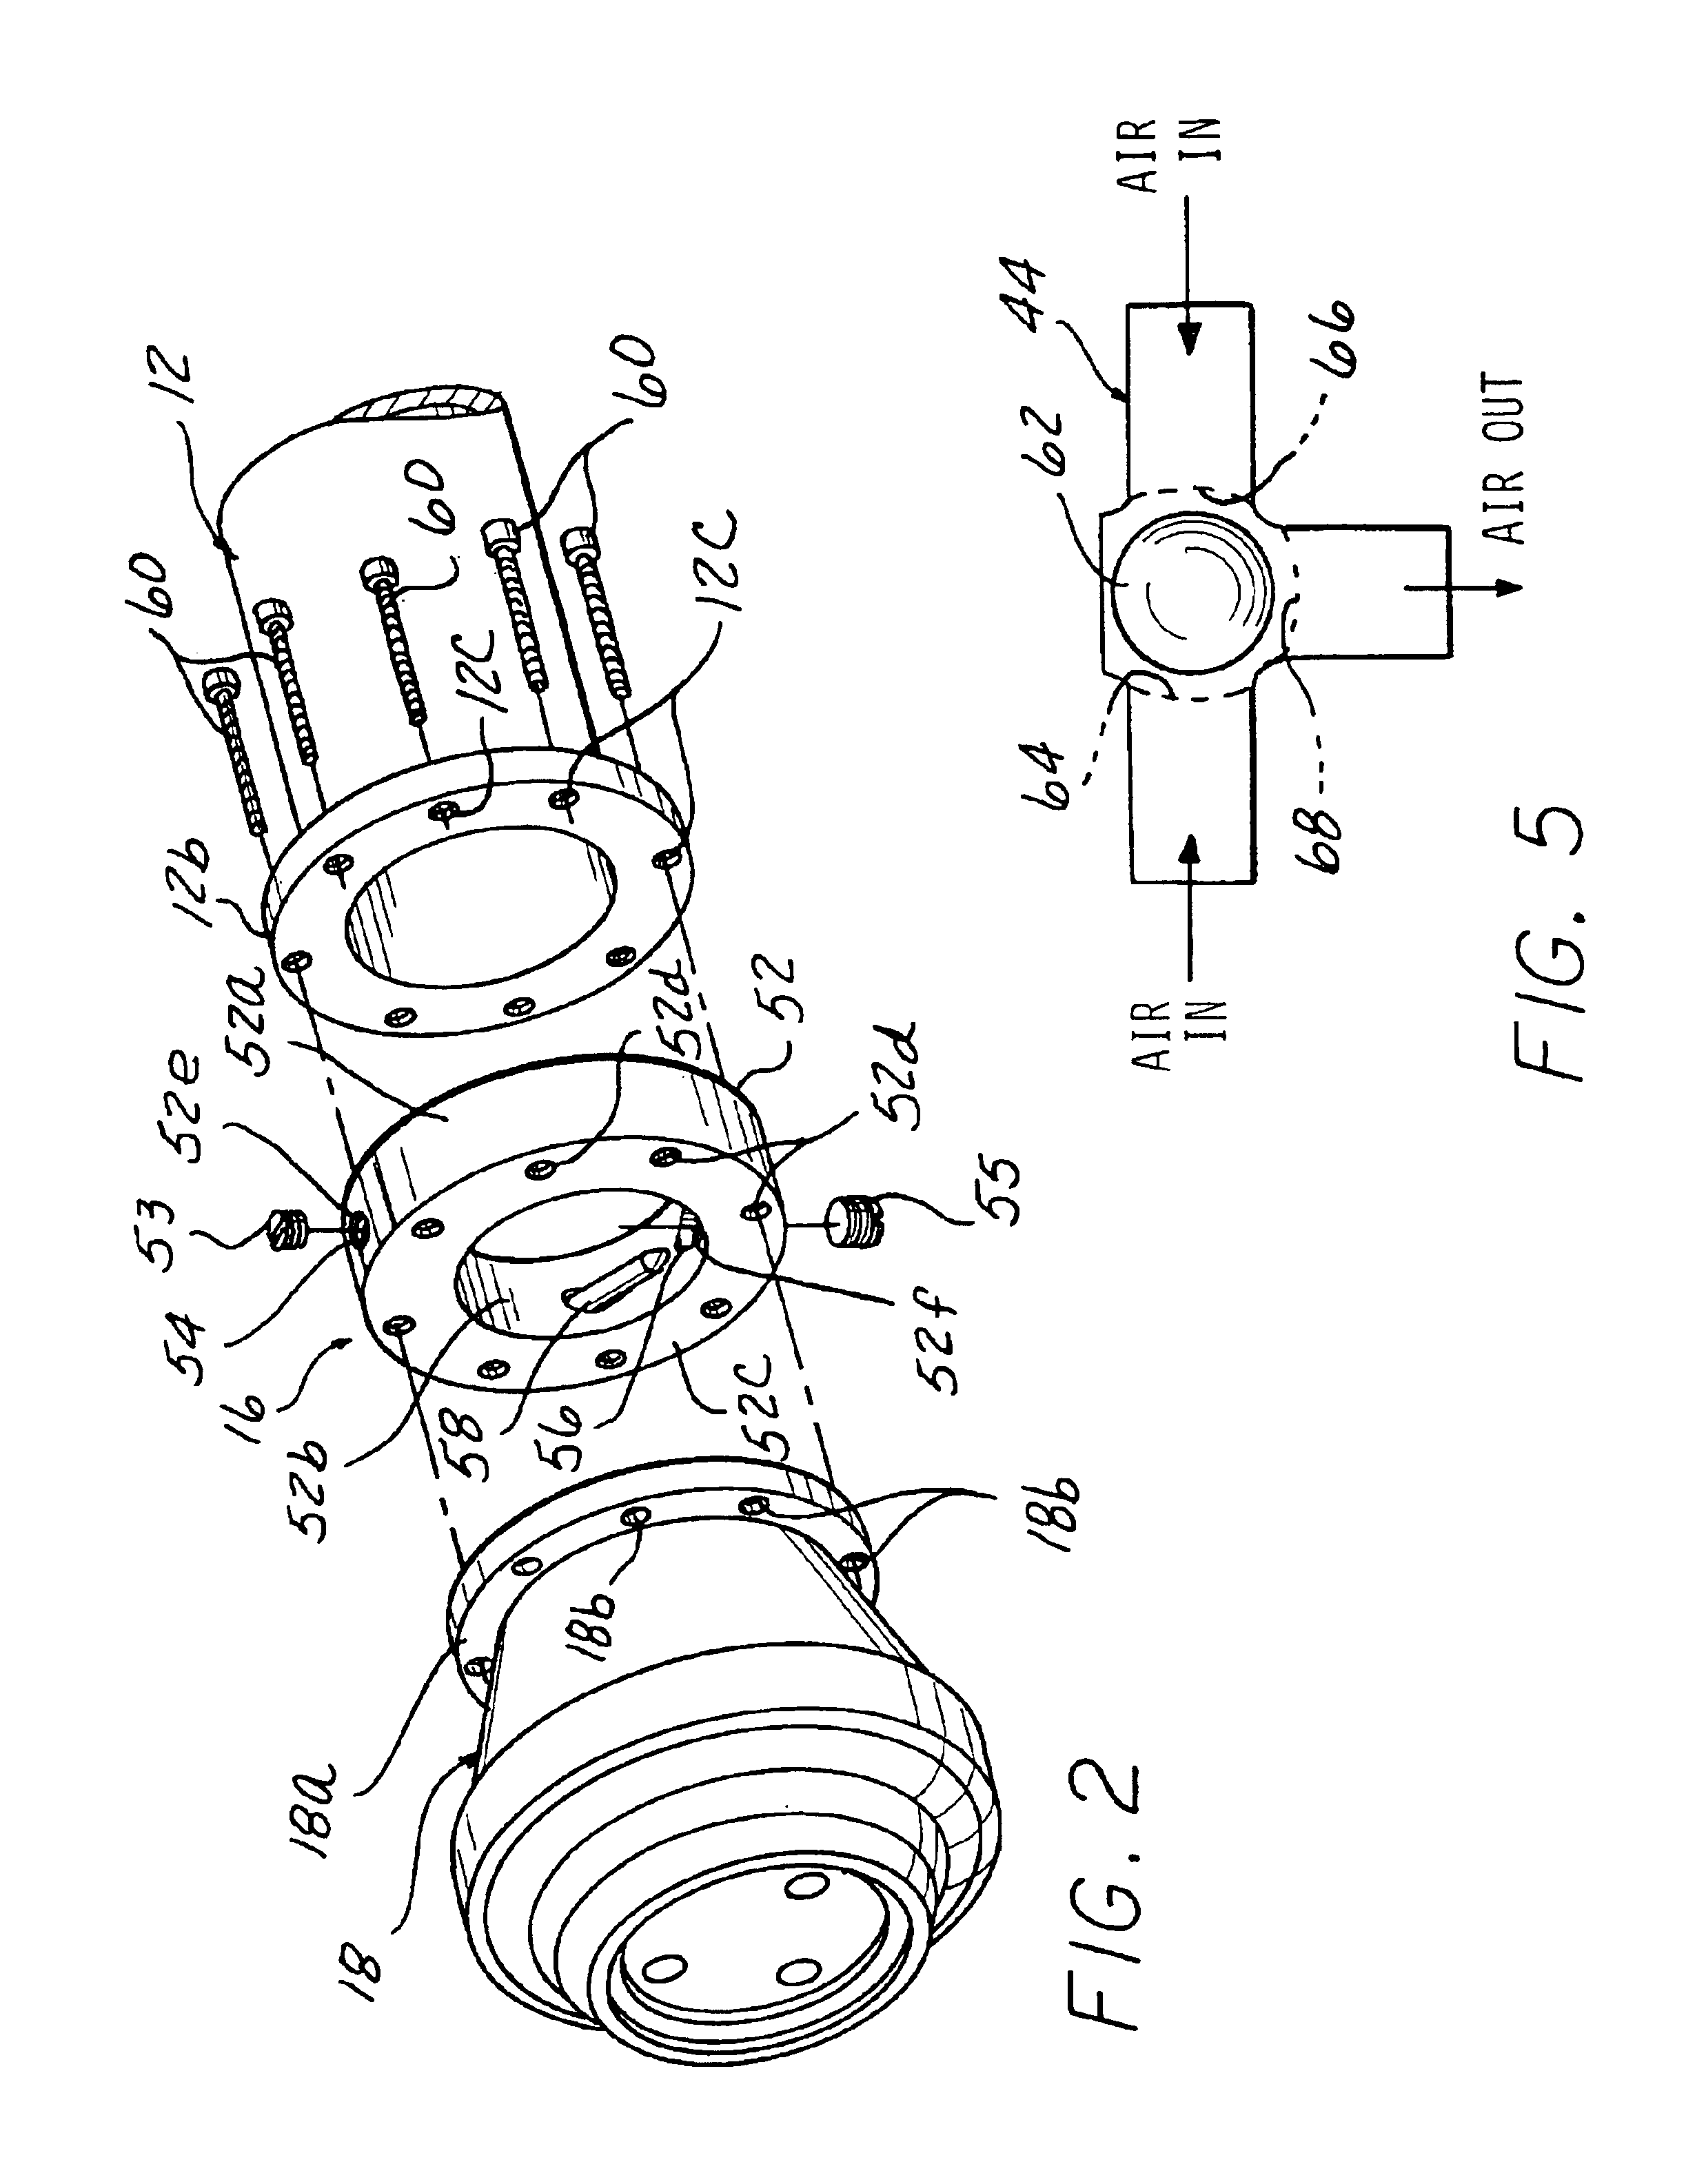 Method and apparatus for removing hazardous liquid from petroleum tanker trailer delivery/loading piping